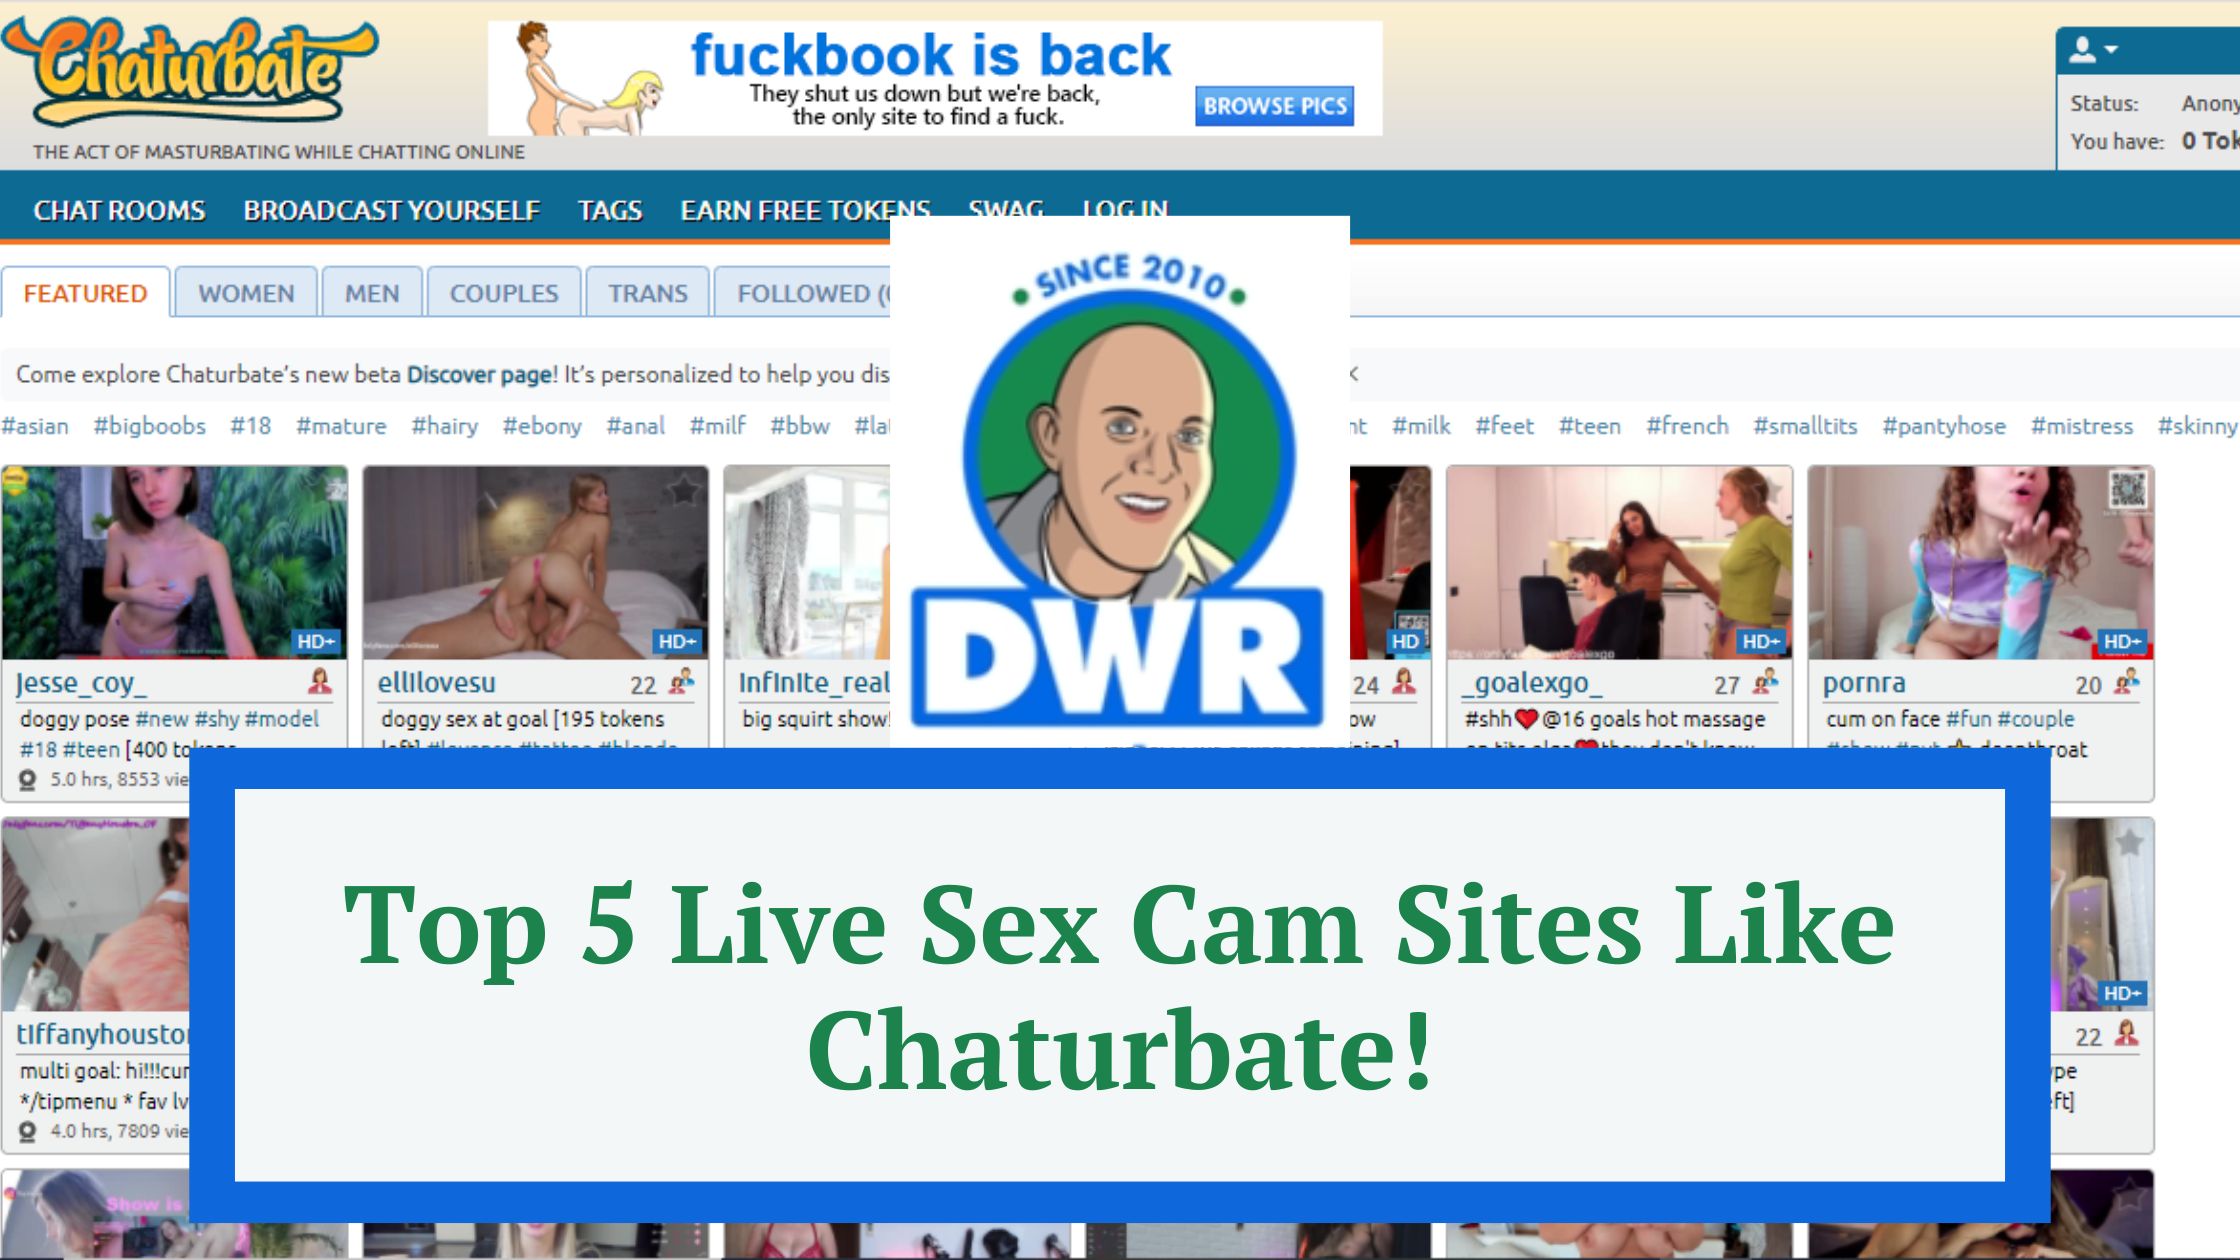 Top 5 Live Sex Cam Sites Like Chaturbate!